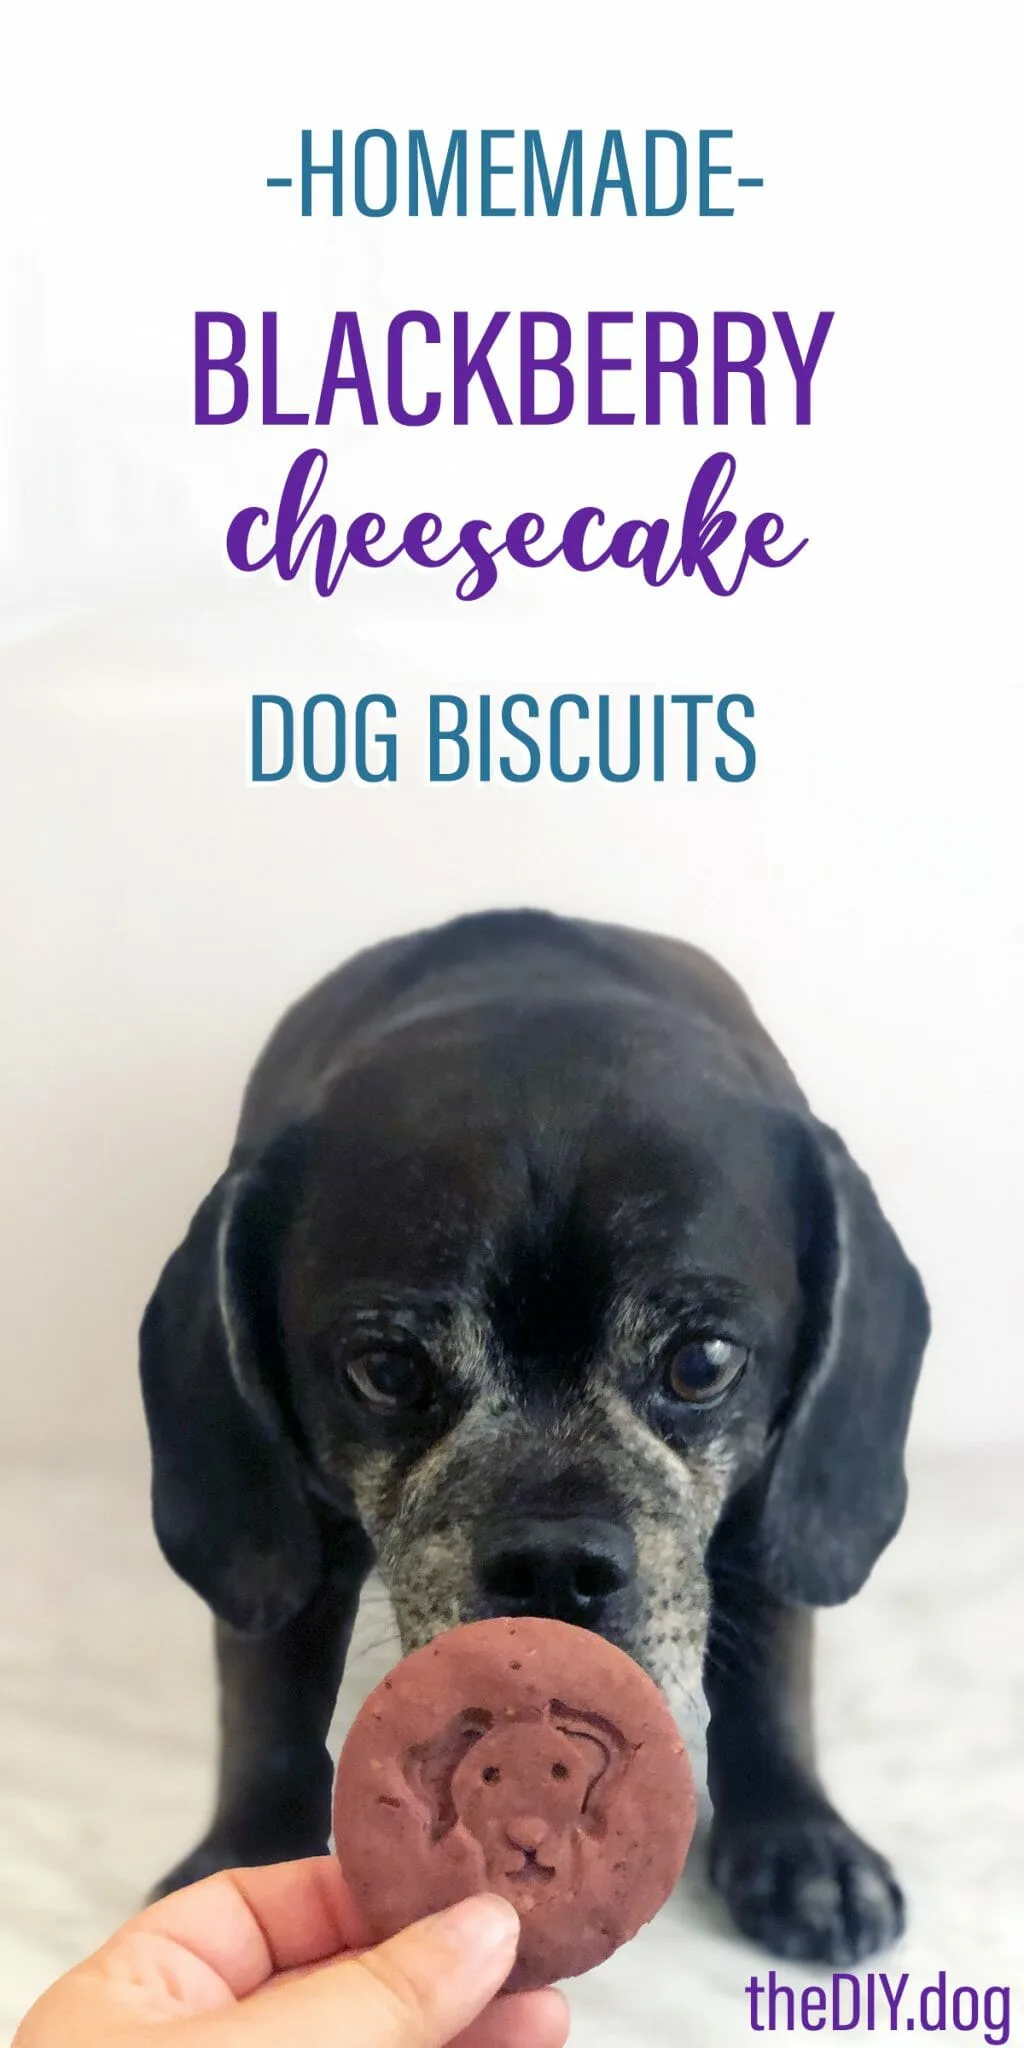 a black puggle staring at a blackberry cheese cake dog biscuit